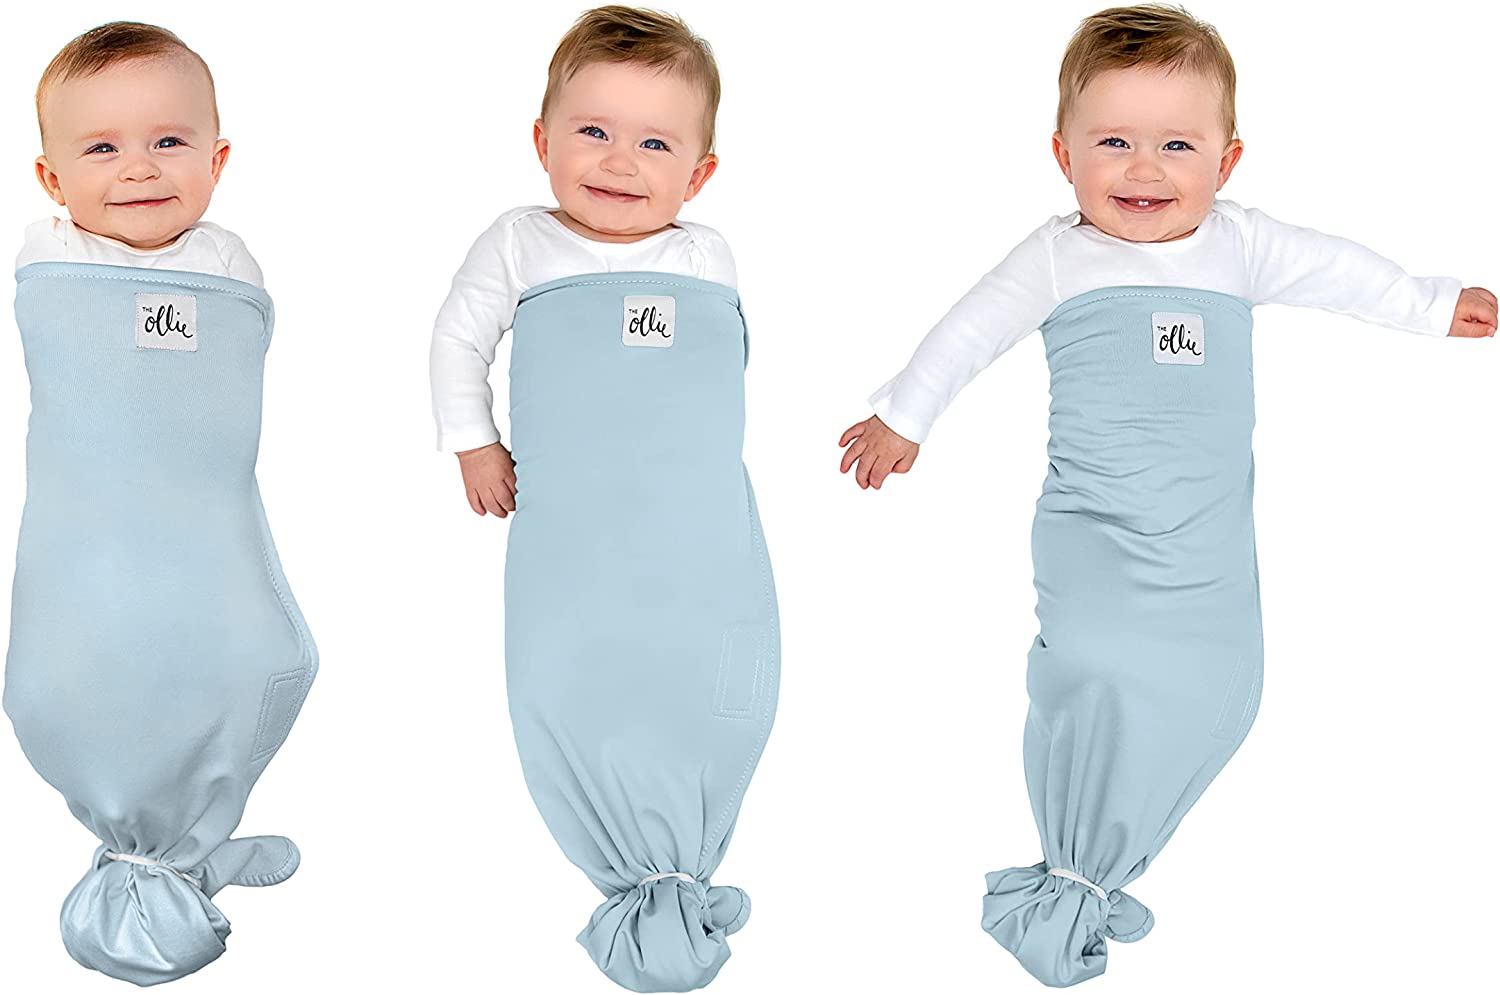 Baby in the Ollie Swaddle in blue